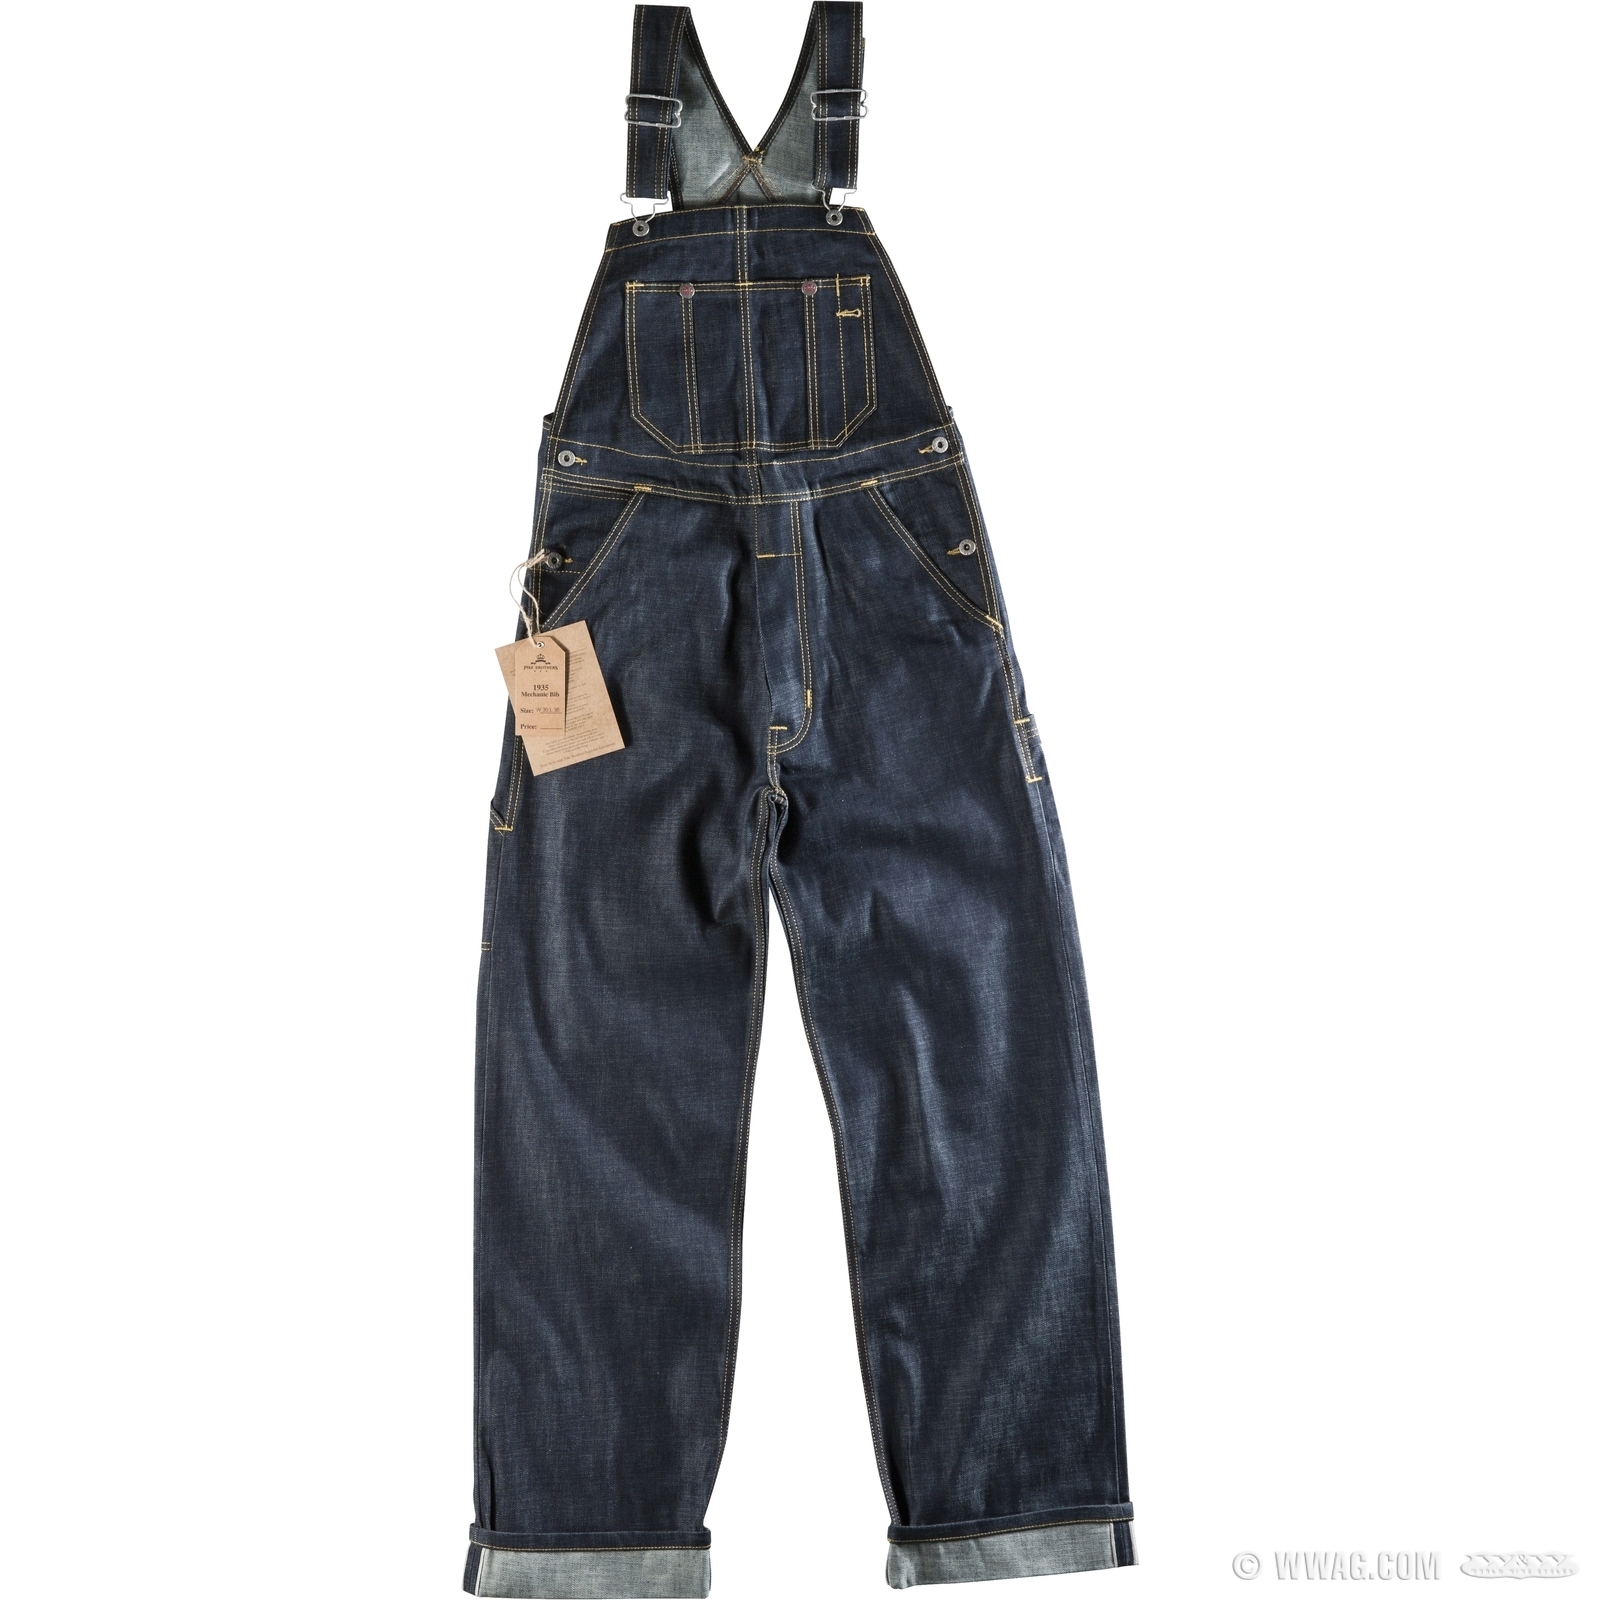 W&W Cycles - Apparel and Helmets > Pike Brothers Mechanic Bib 1935 Overalls